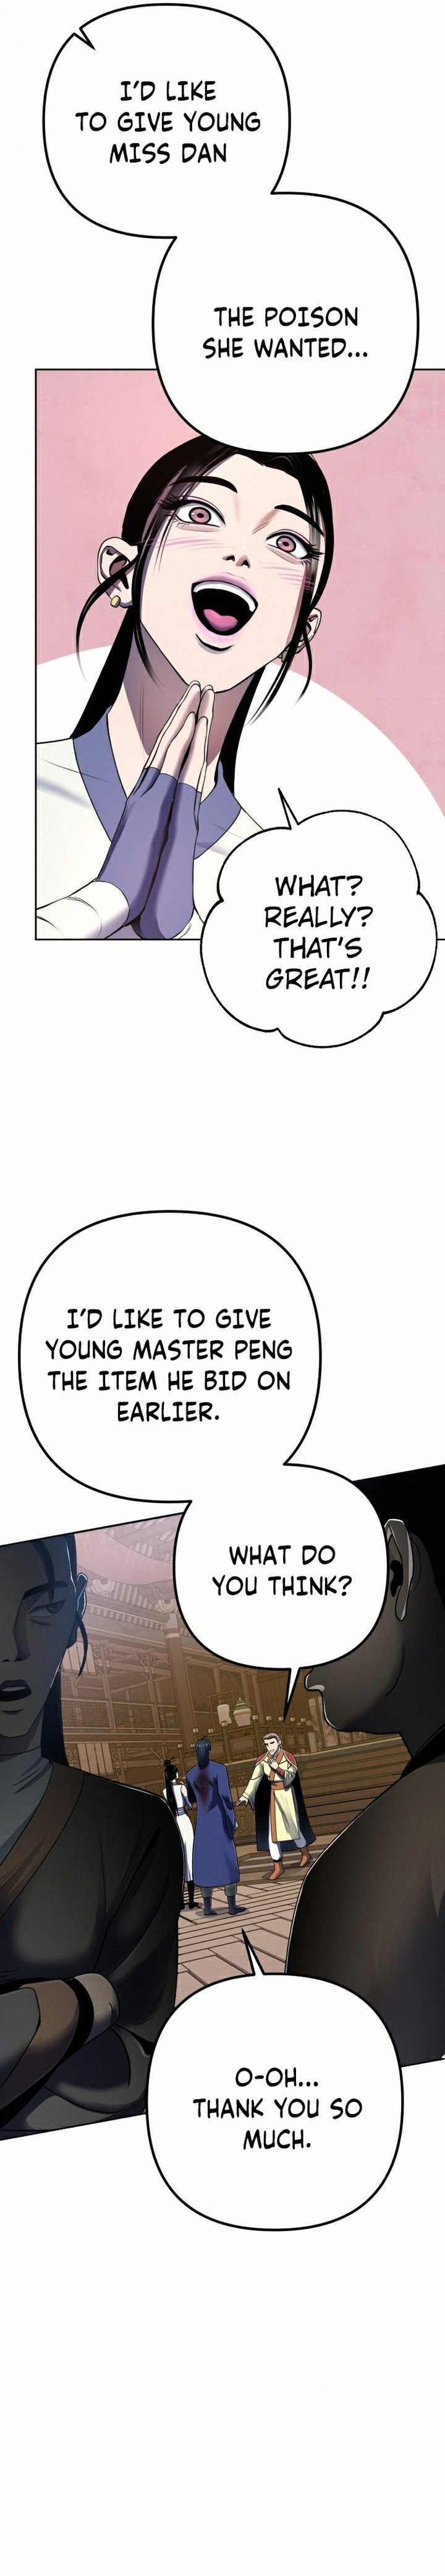 Revenge Of Young Master Peng 26 21